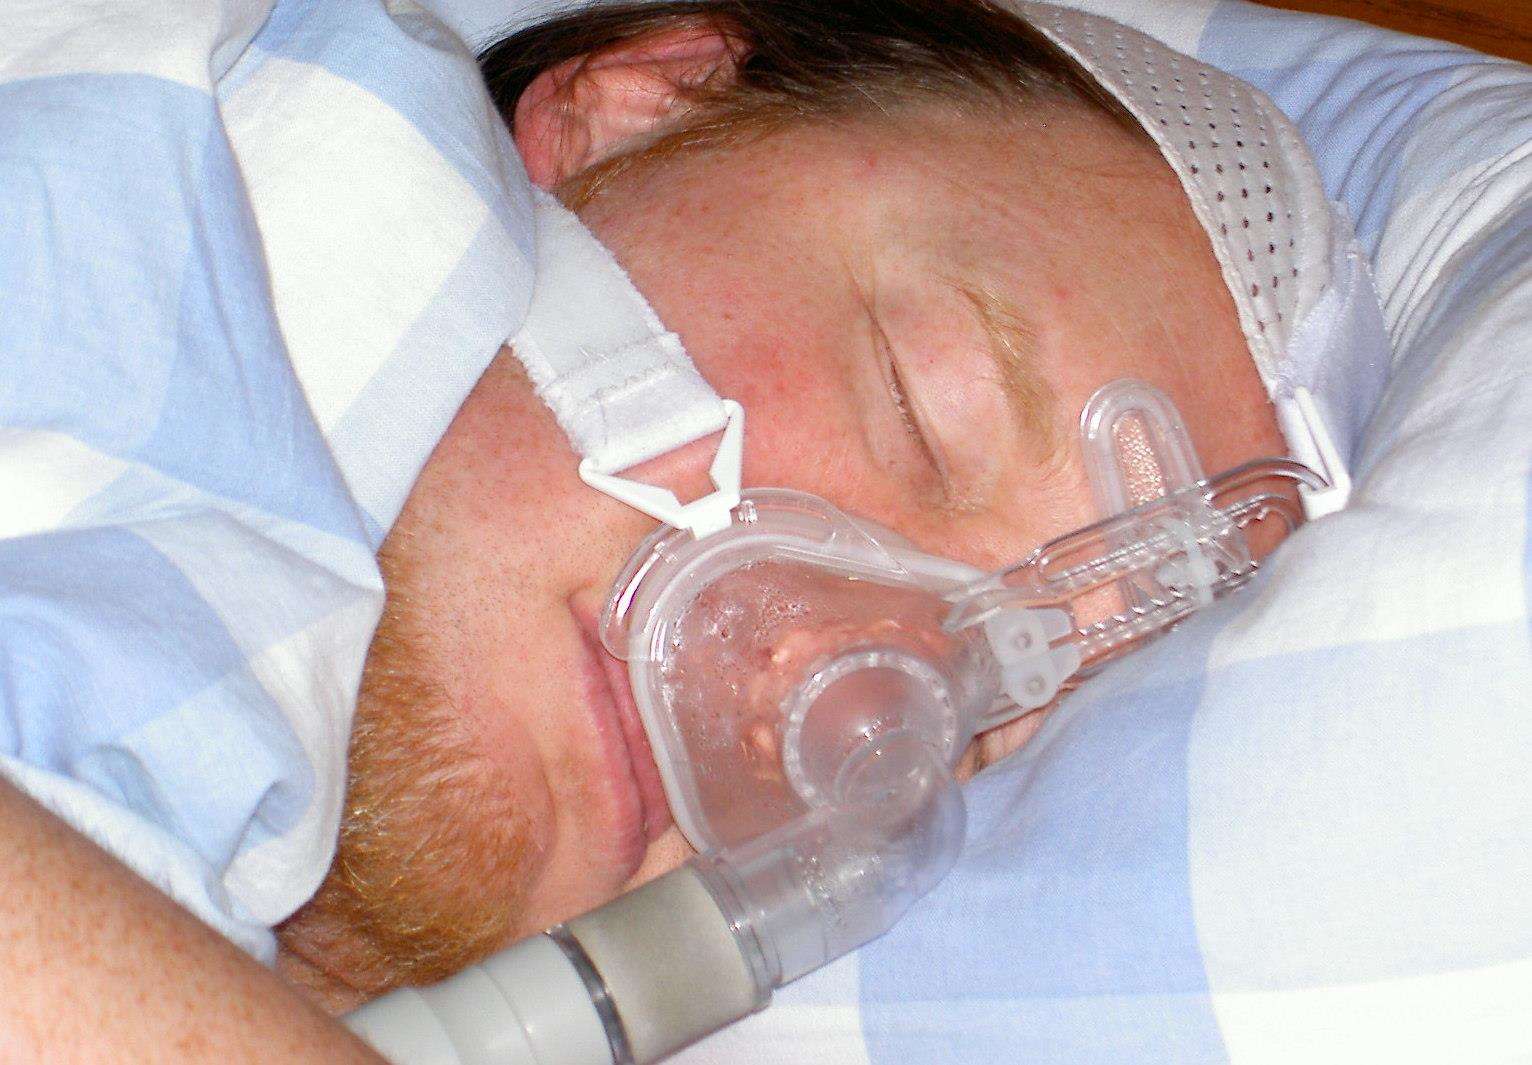 A CPAP (continuous positive airway pressure) therapy mask is considered the best treatment for sleep apnea